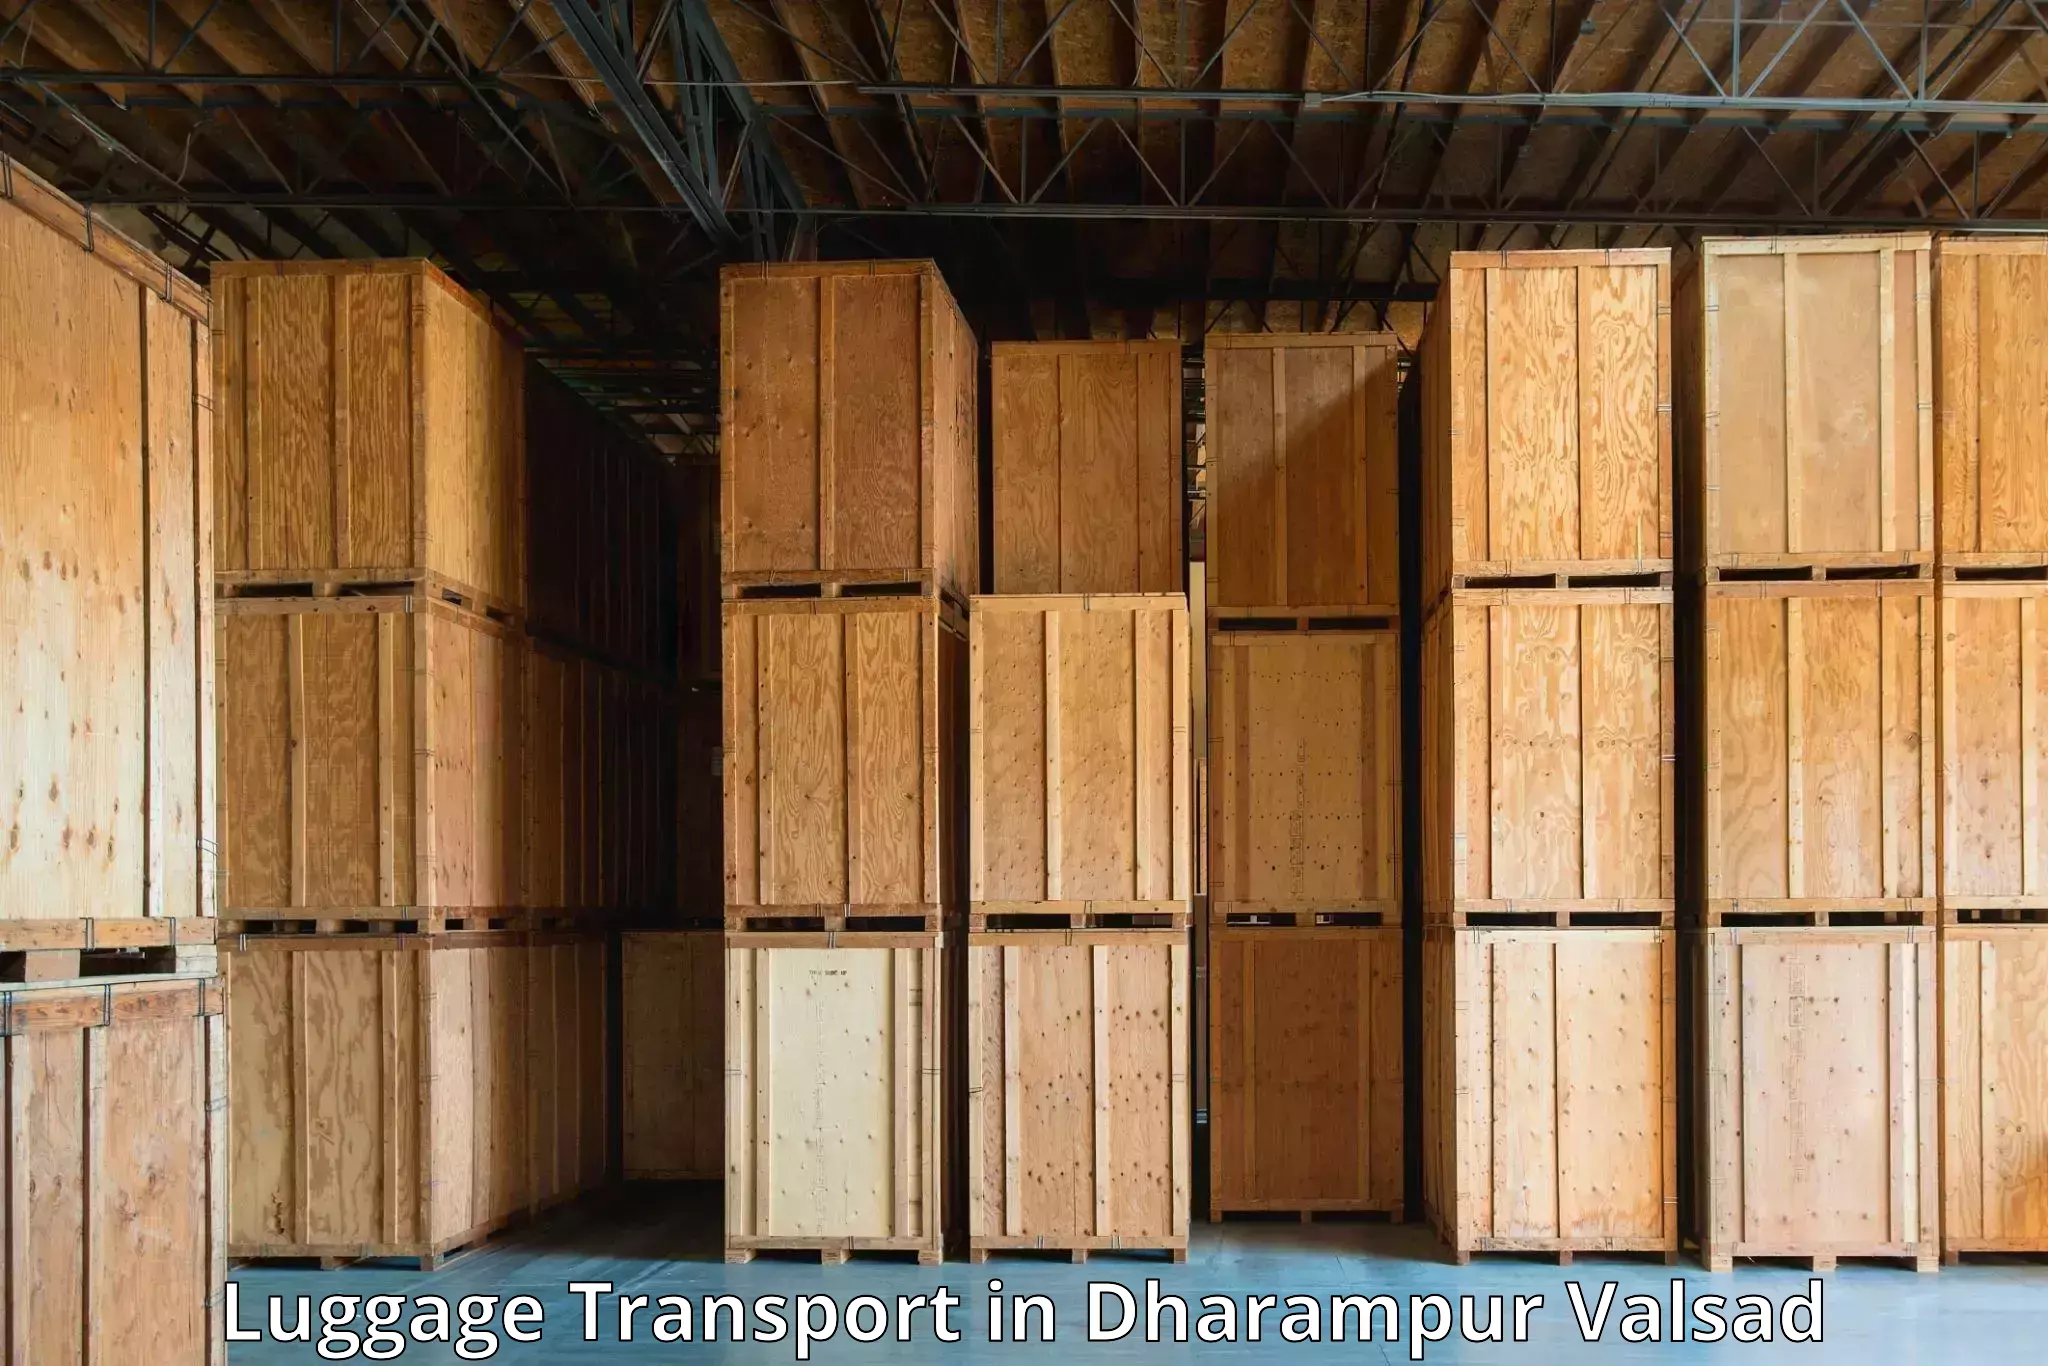 Luggage transport guidelines in Dharampur Valsad